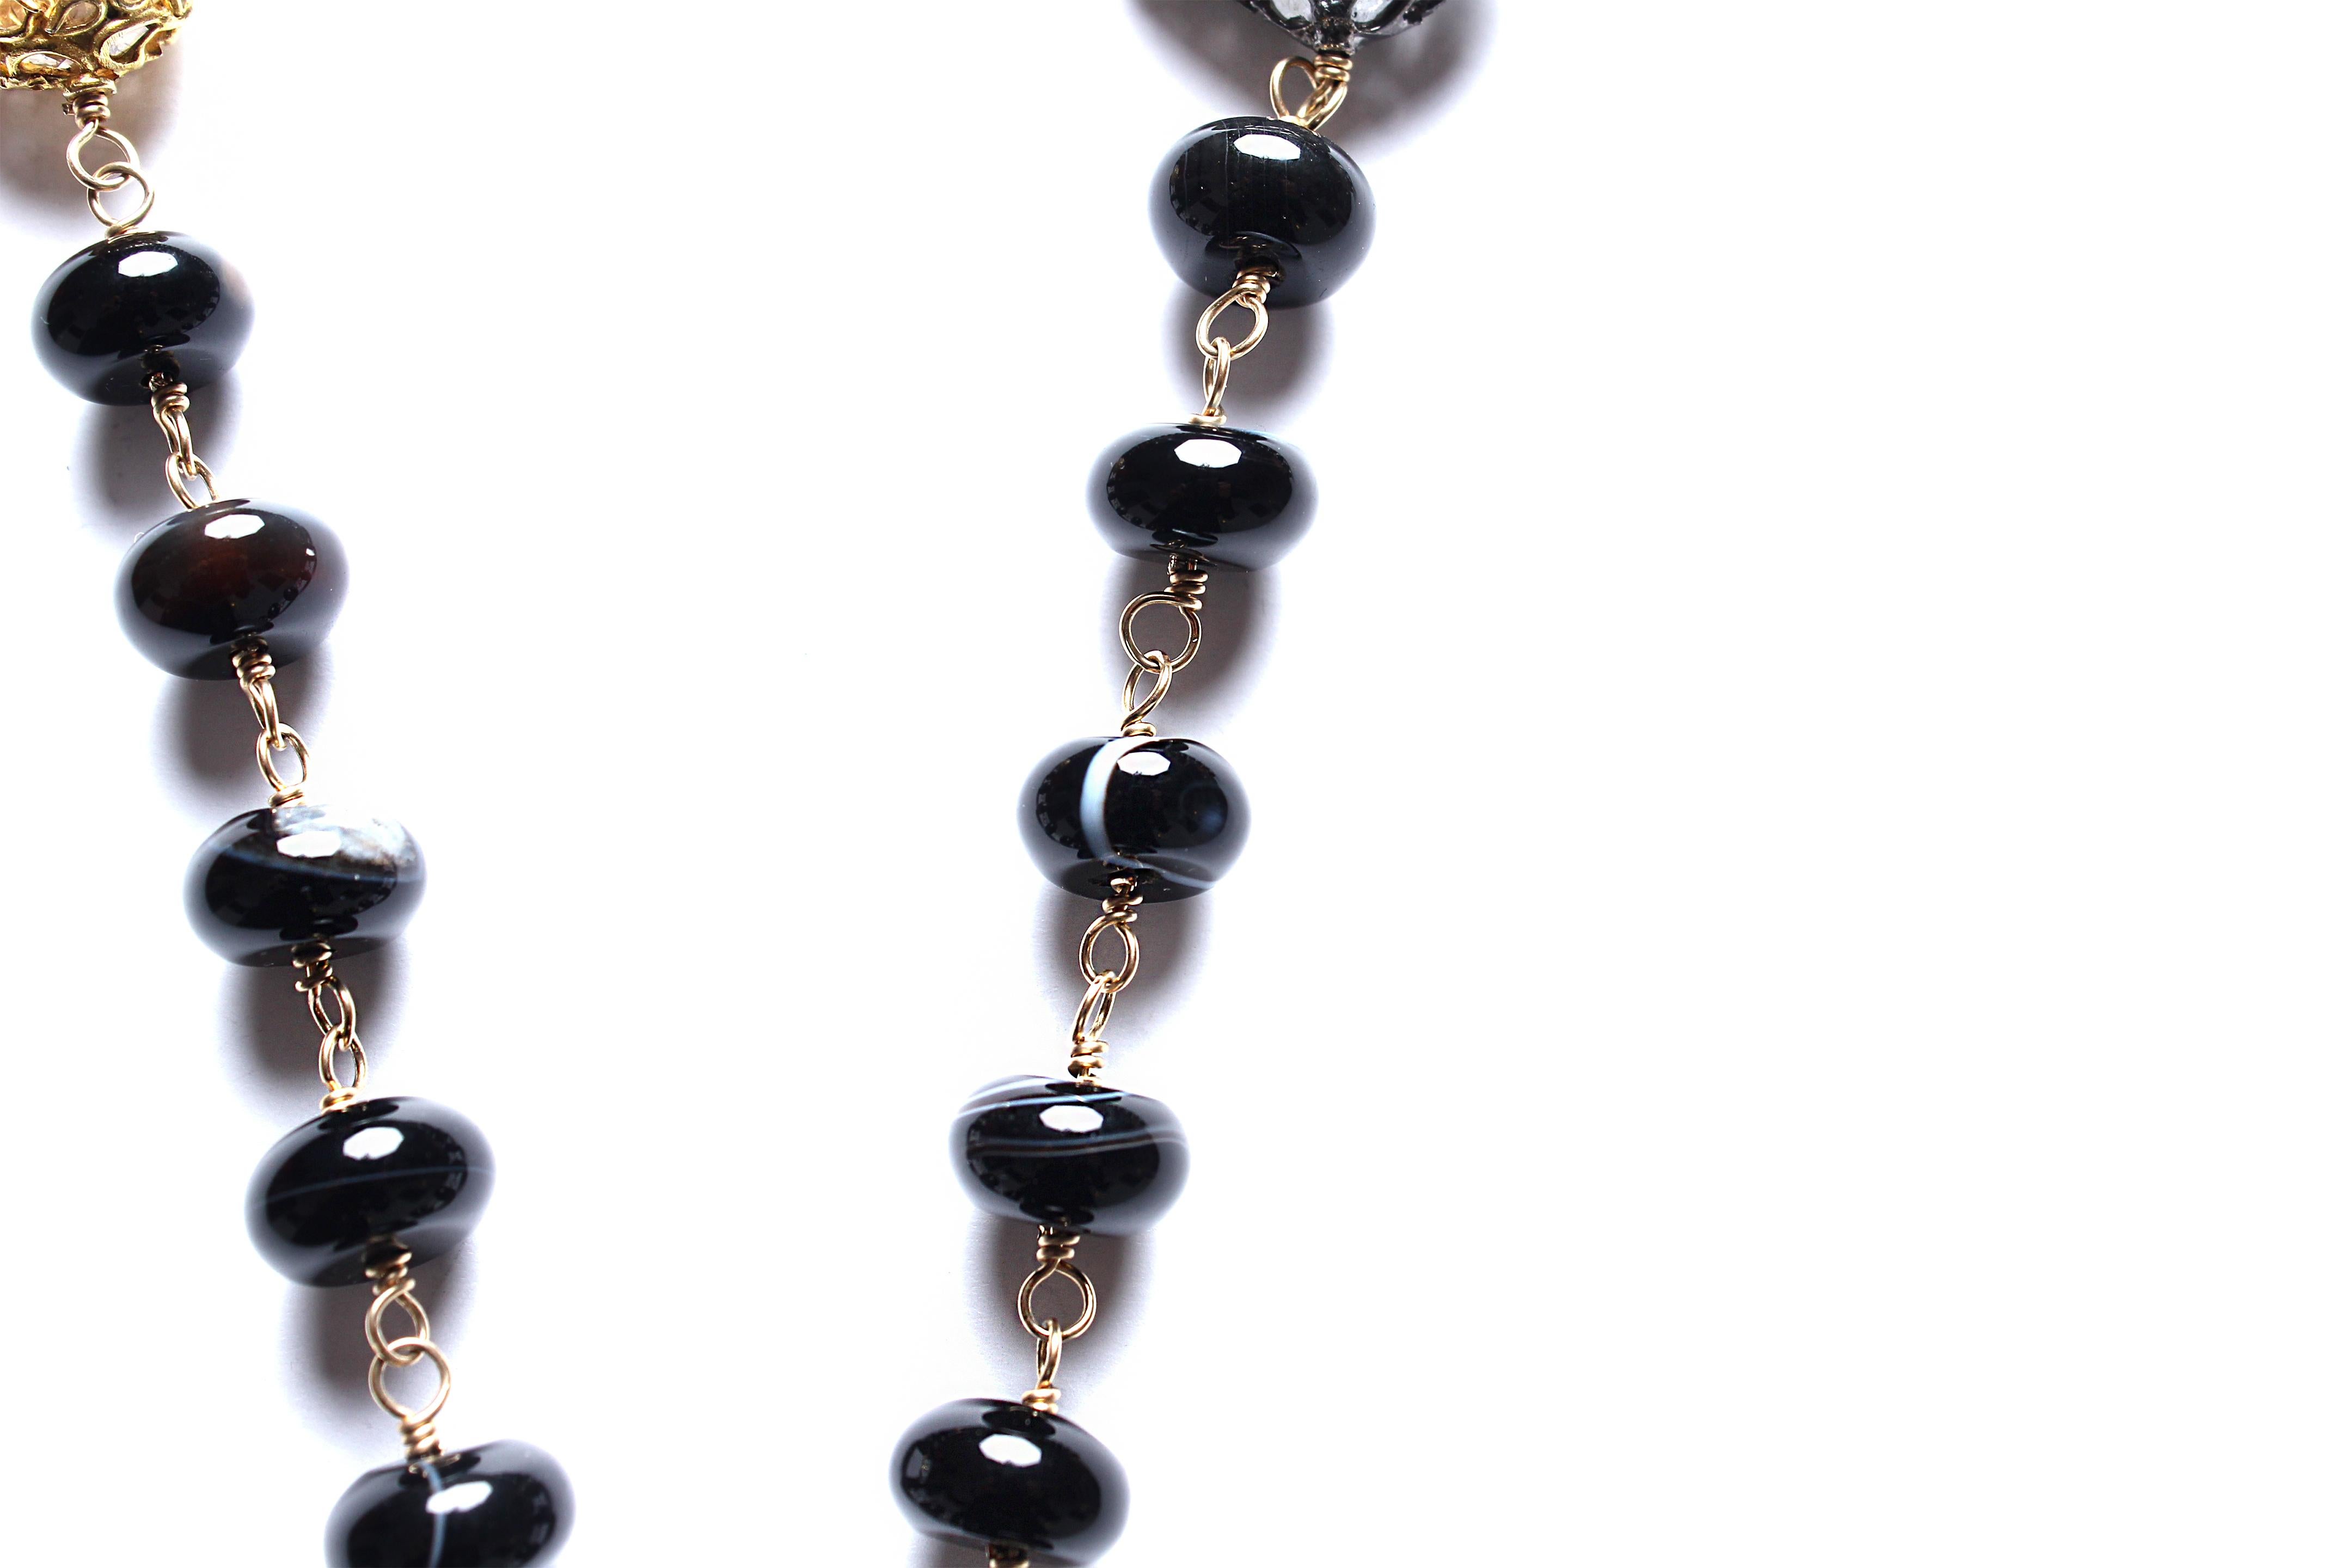 Rosary necklace consists of:
- 37